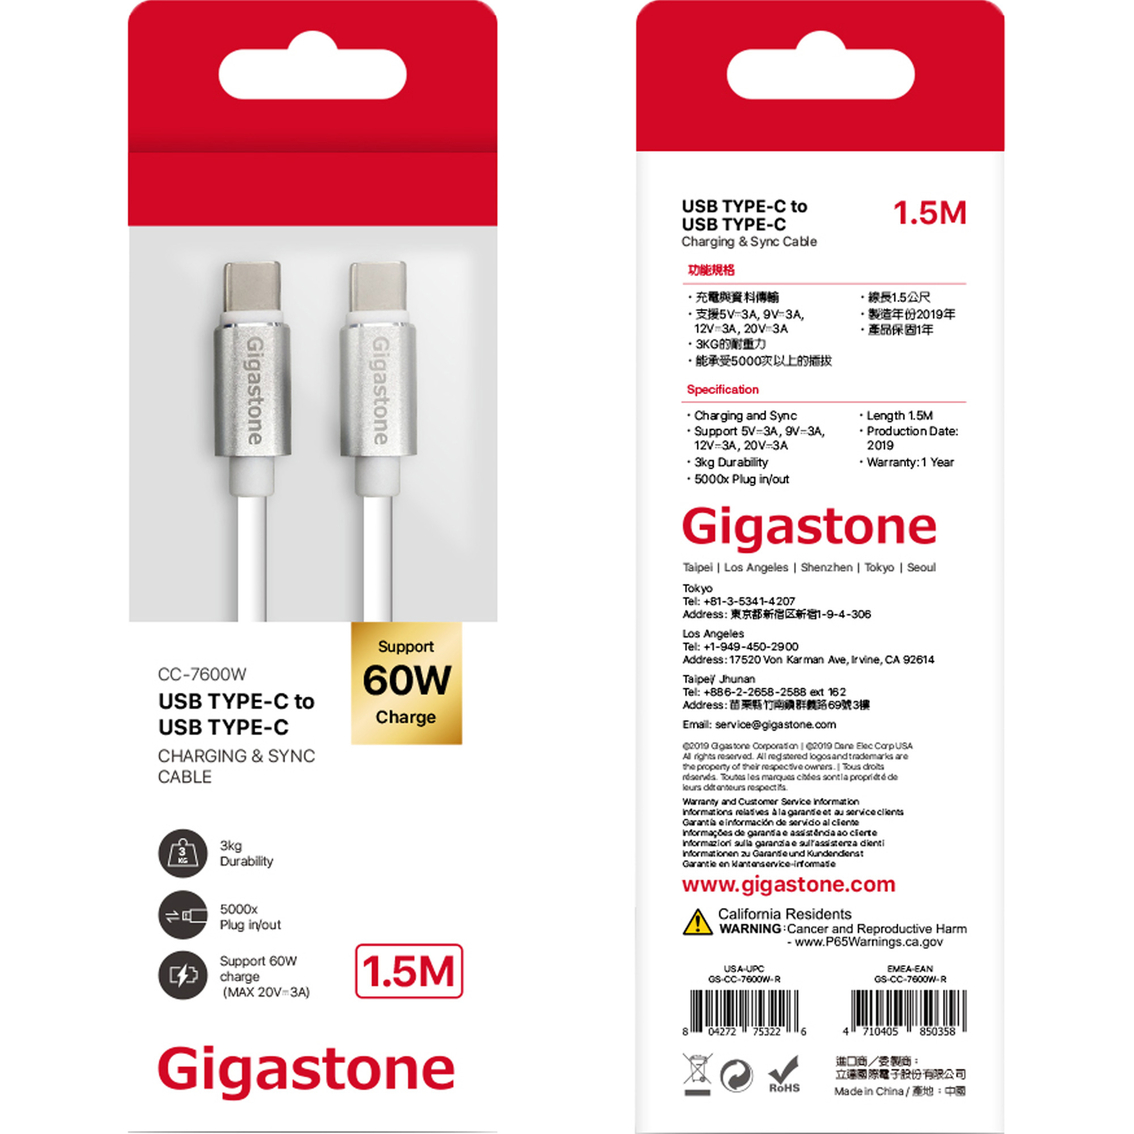 Gigastone Type C to Type C Charging Cable - Image 1 of 2